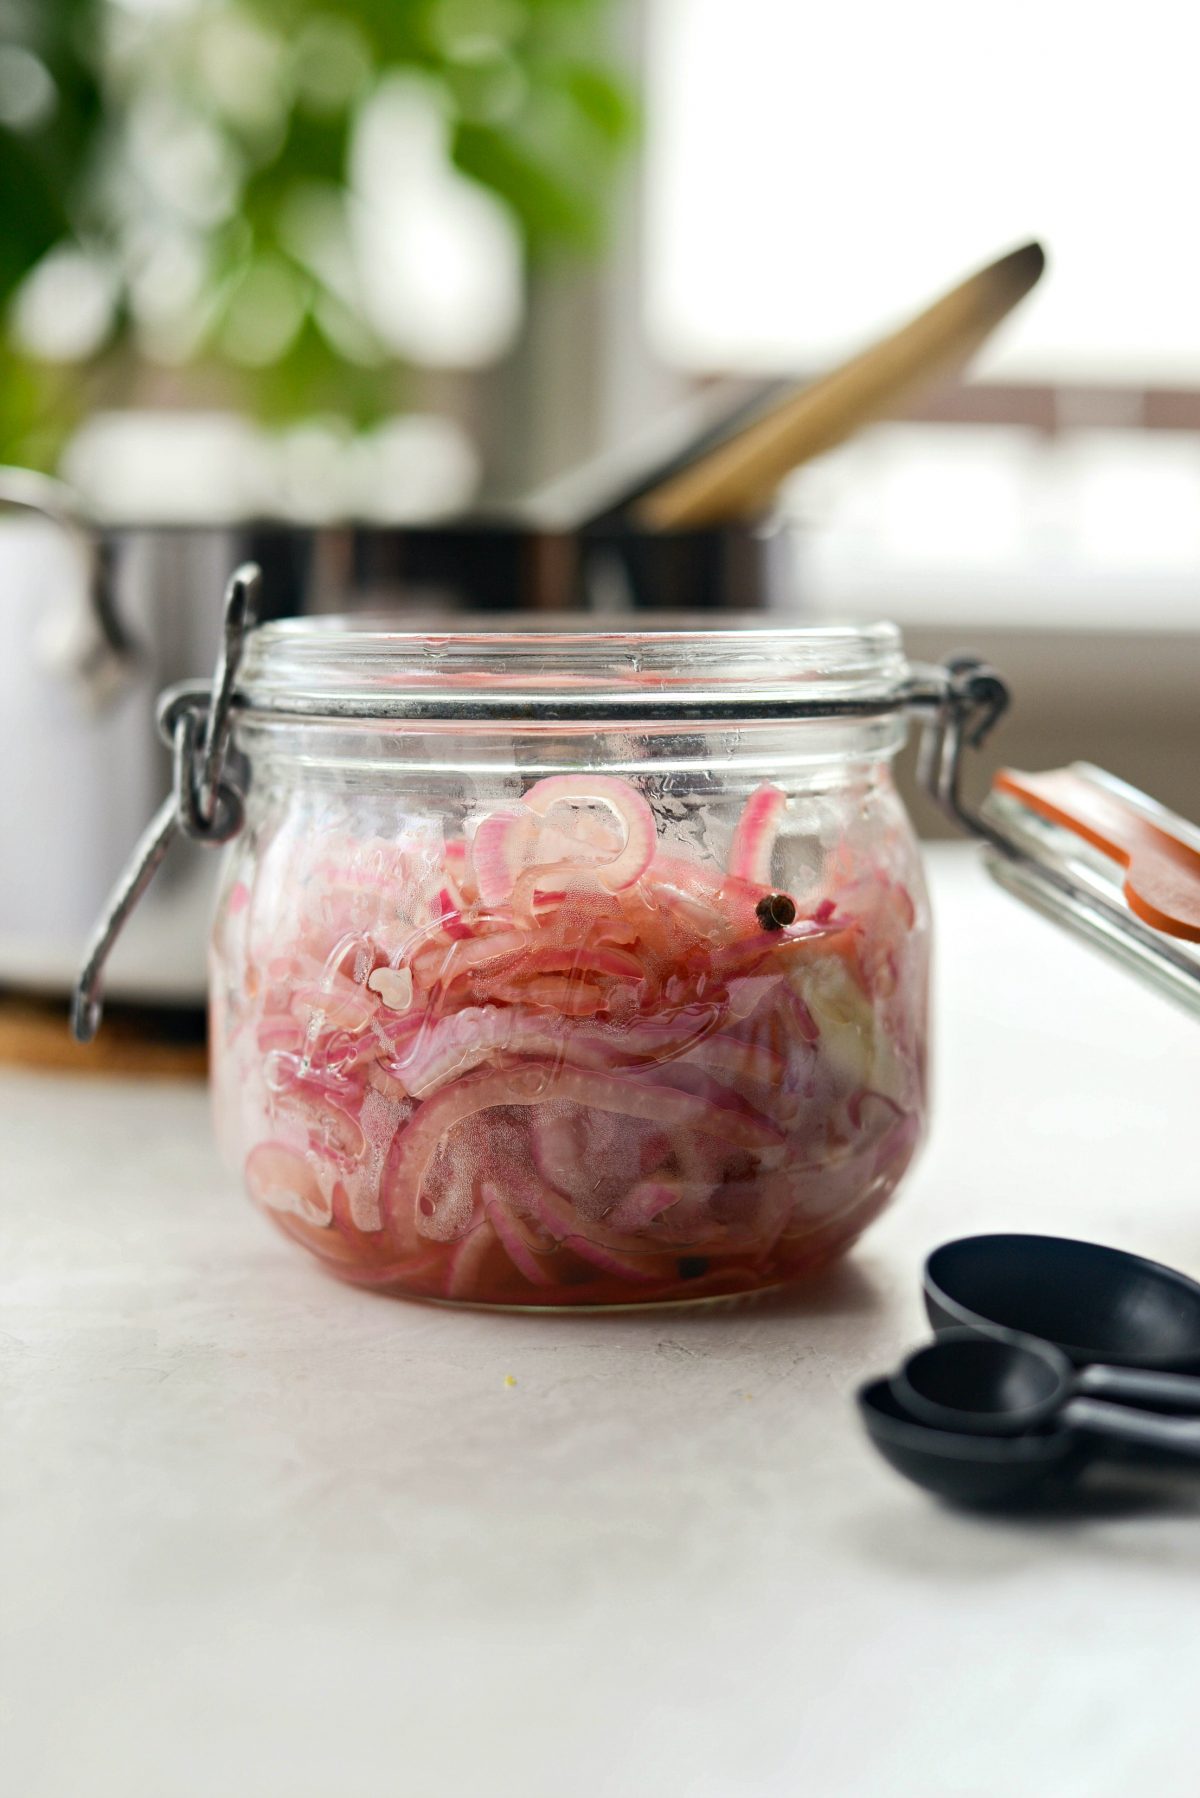 Quick Pickled Red Onions l SimplyScratch.com #homemade #pickled #redonions #condiments #preserving #pickling